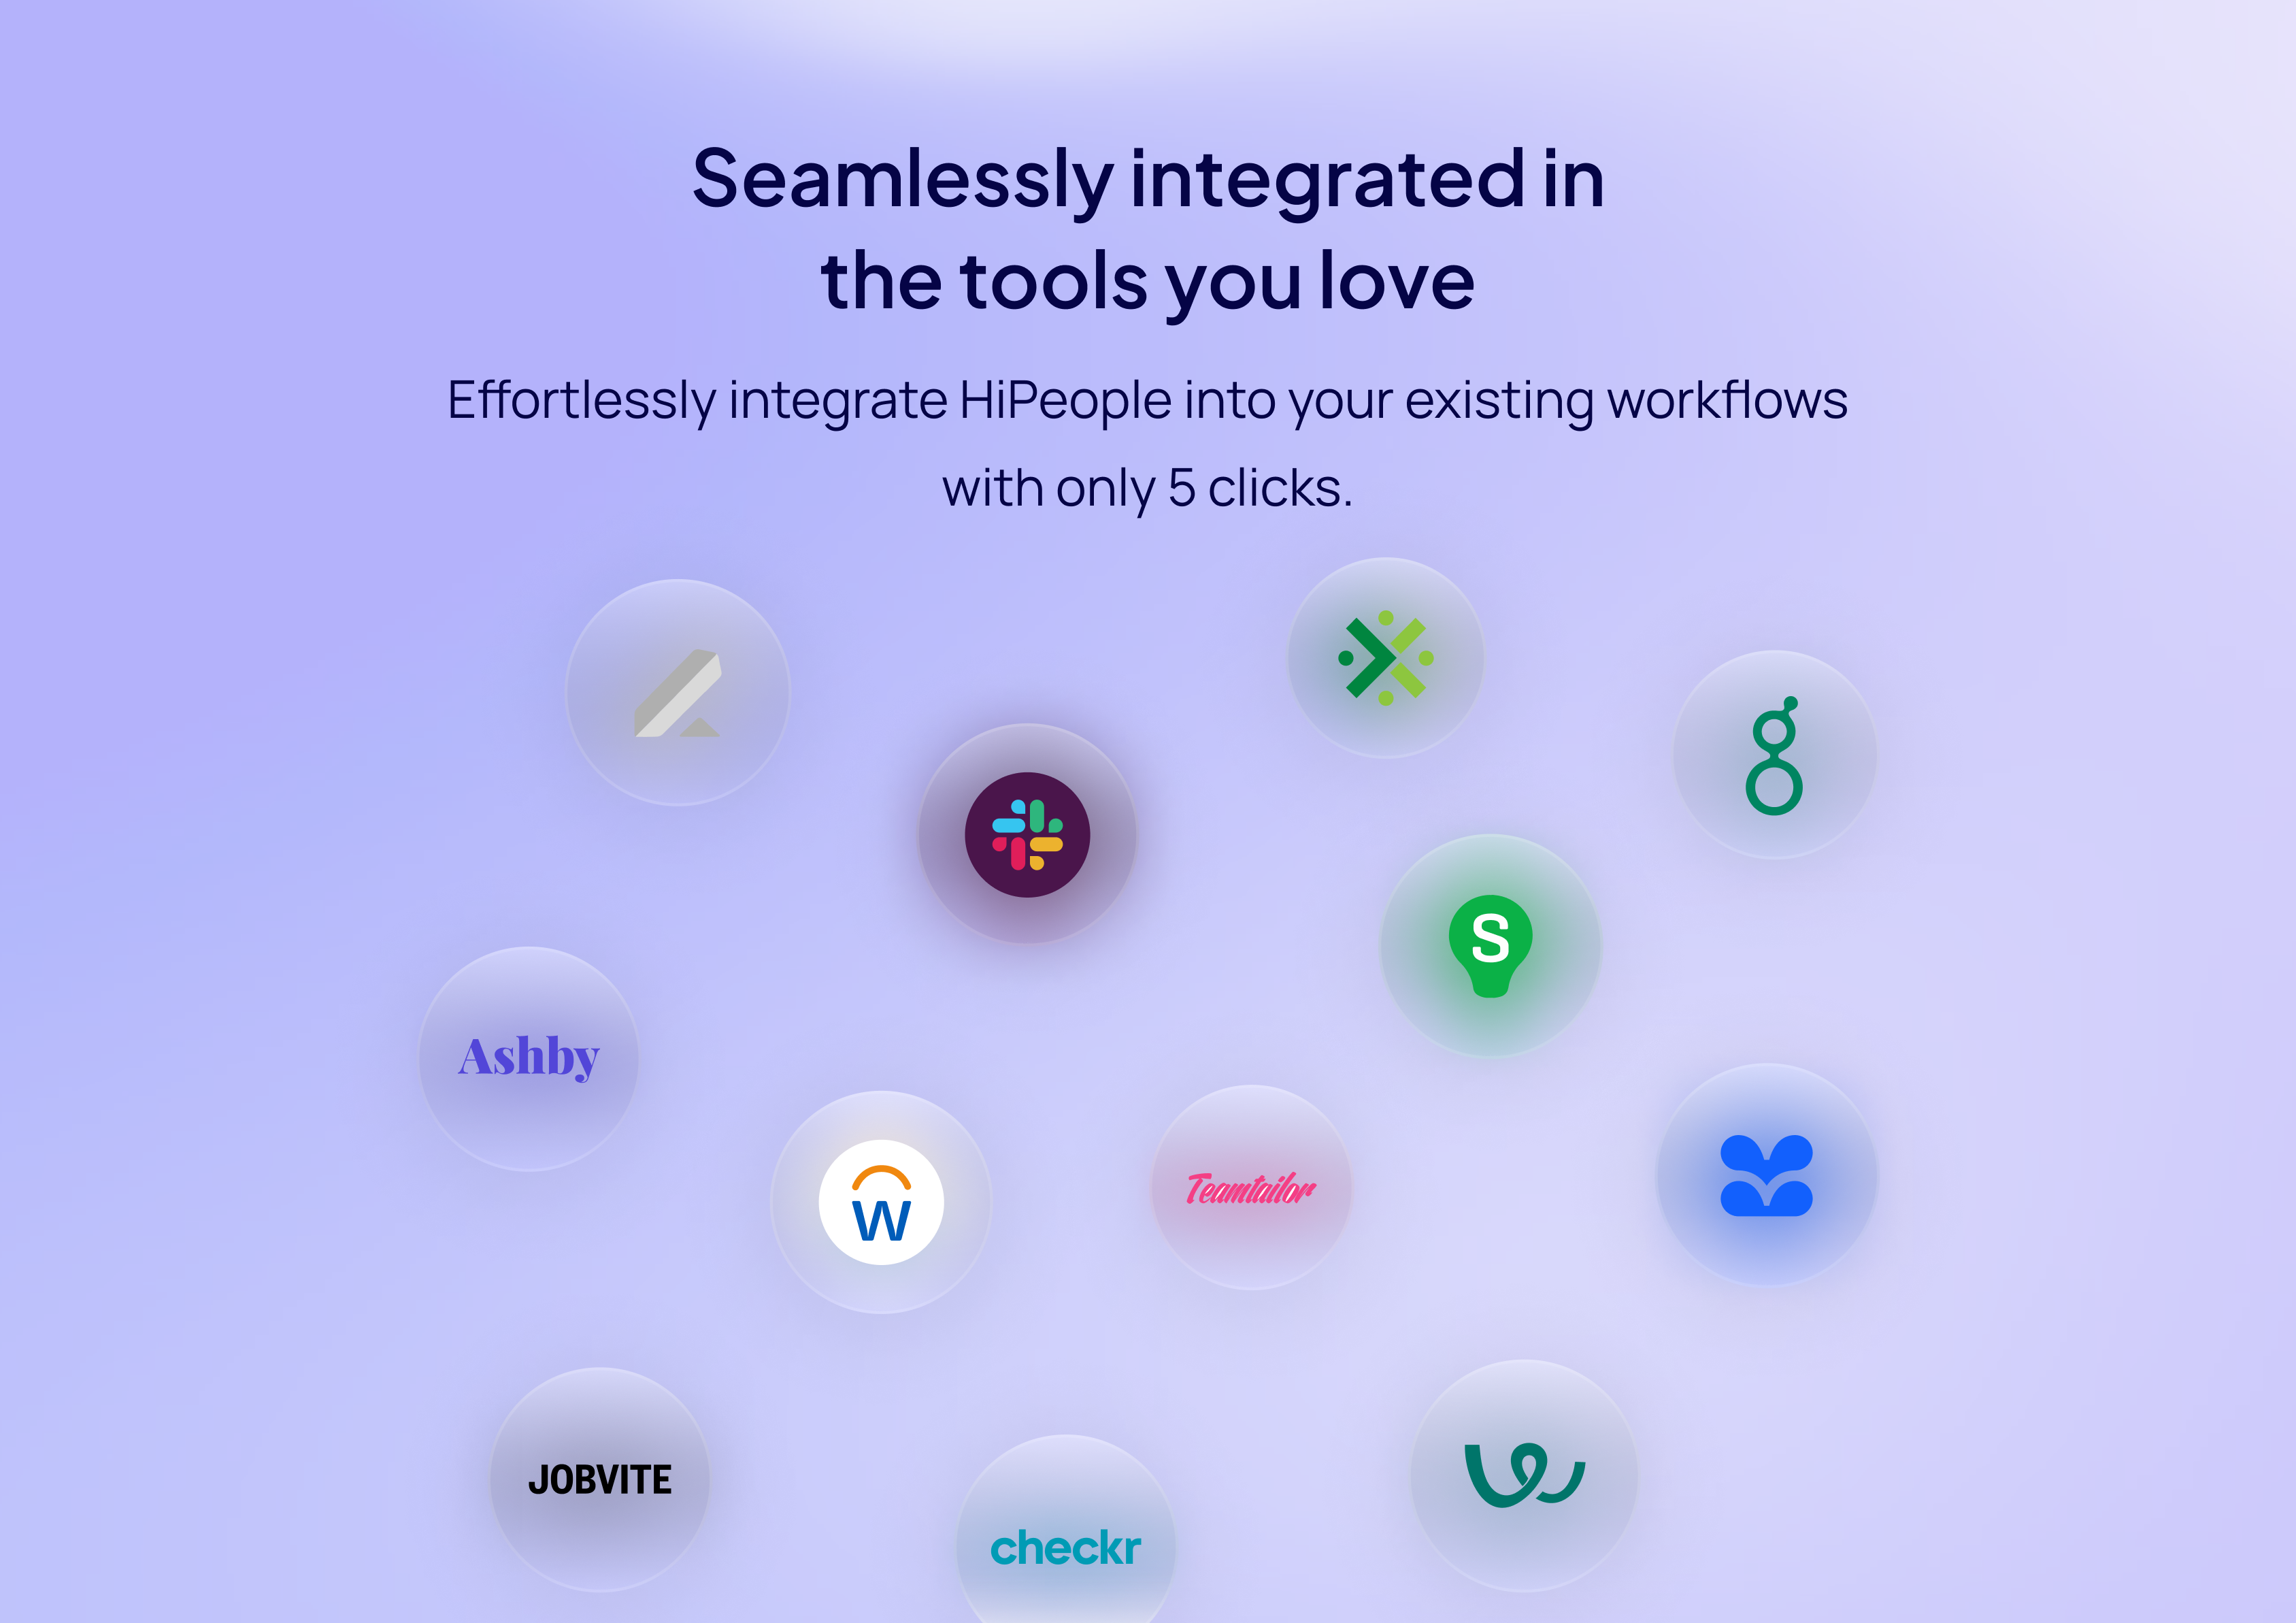 Seamlessly integrated in the tools you love
Effortlessly integrate HiPeople into your existing workflows with only 5 clicks.